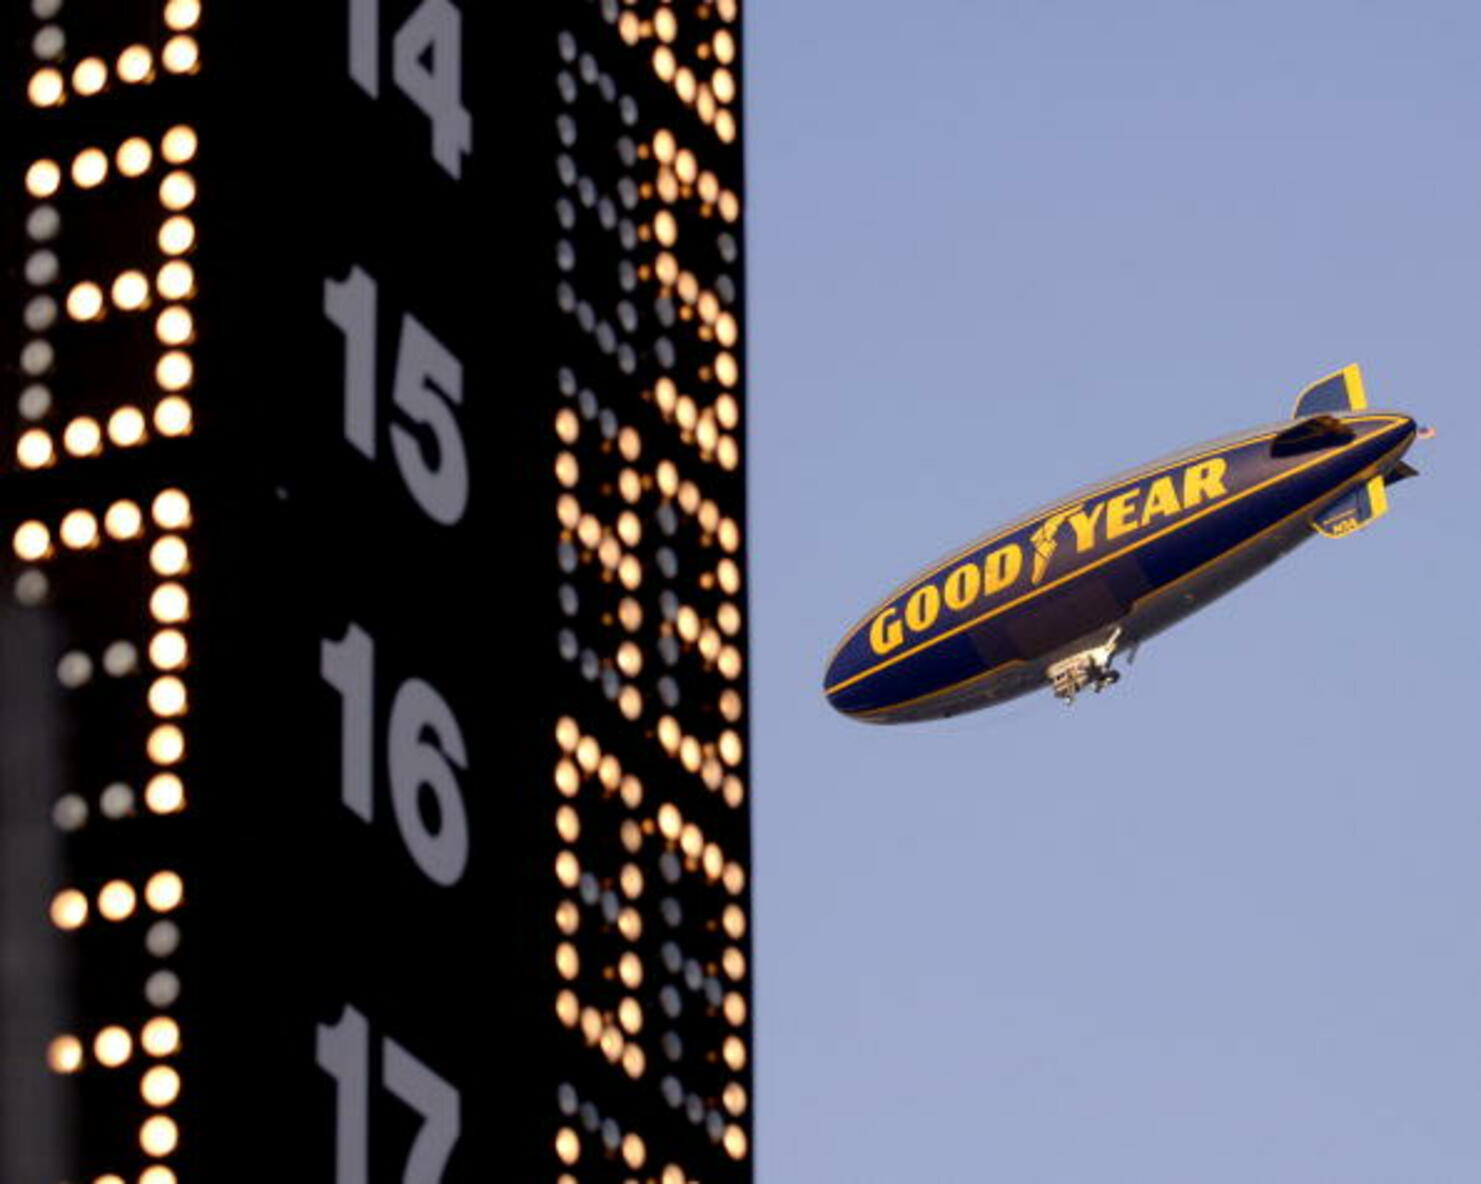 Airbnb: Goodyear Blimp will let you stay overnight in the airship